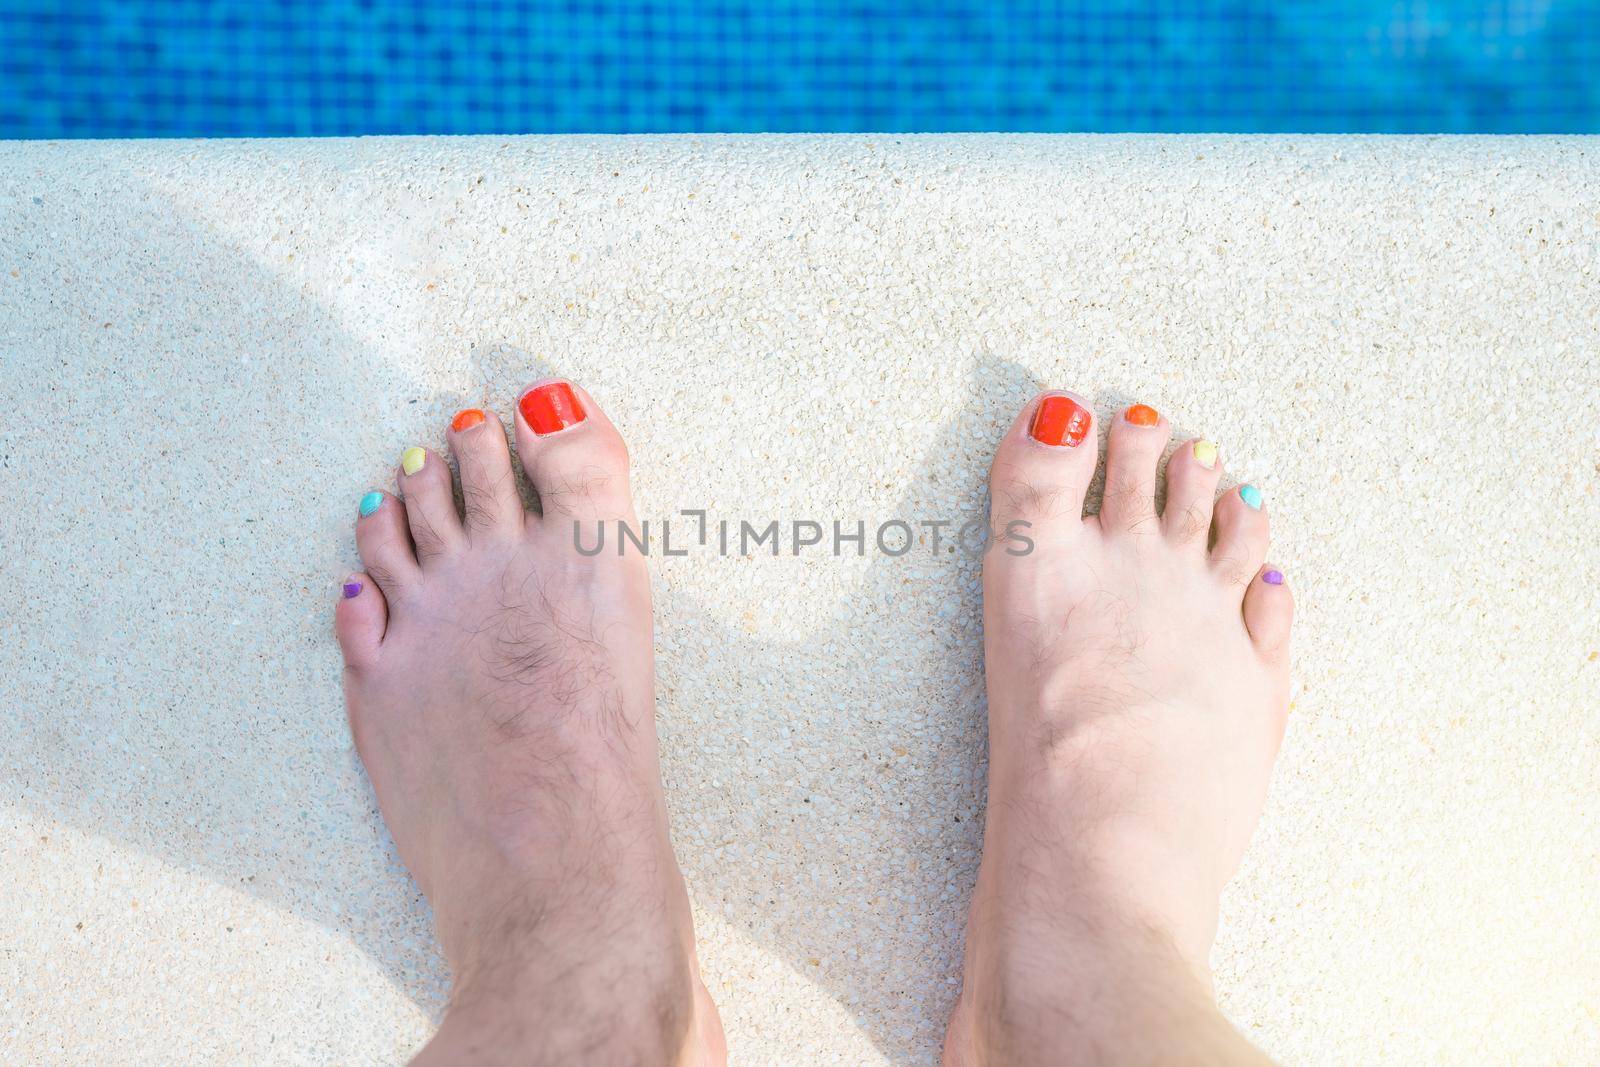 feet of a hairy man with his nails painted in LGBTIQ colours. bare feet at the edge of a swimming pool. concept of holidays and diversity. outdoors, natural light, summer days.